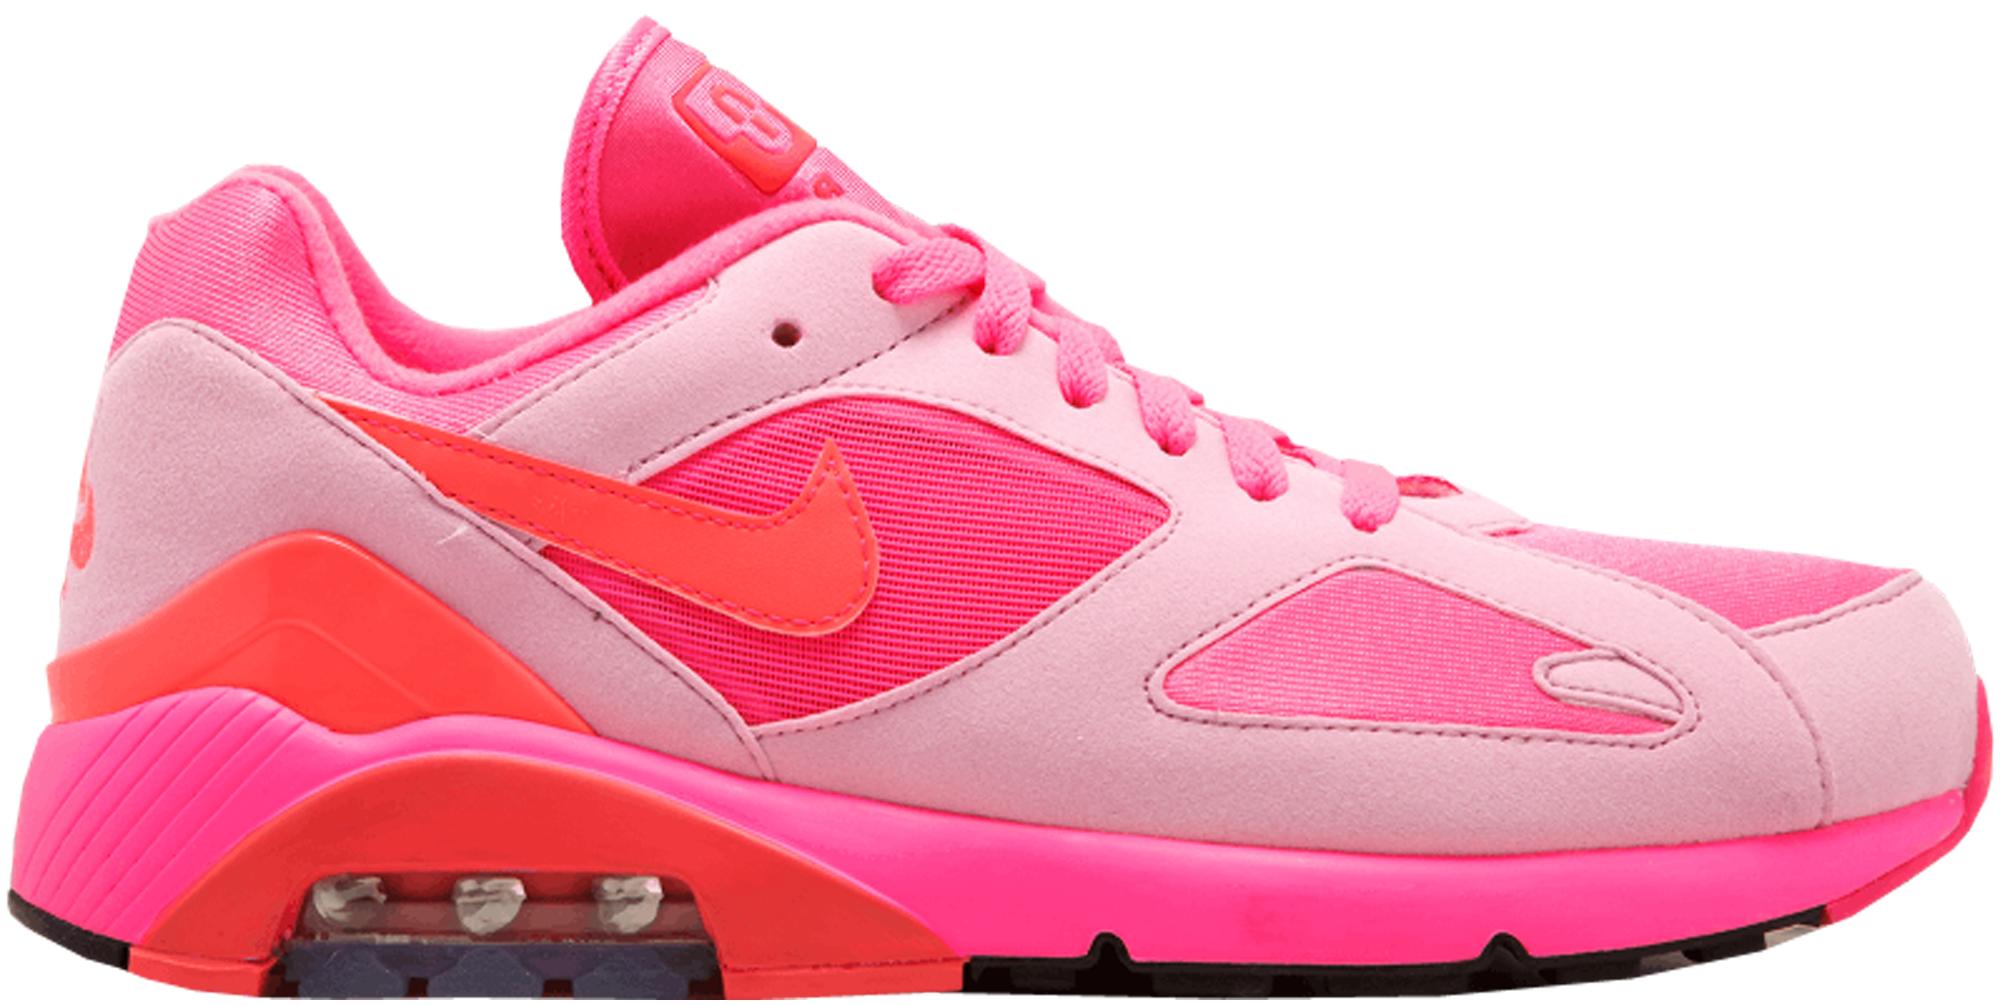 Comme des Garcons x Nike Air Max 180 Pink - StockX News